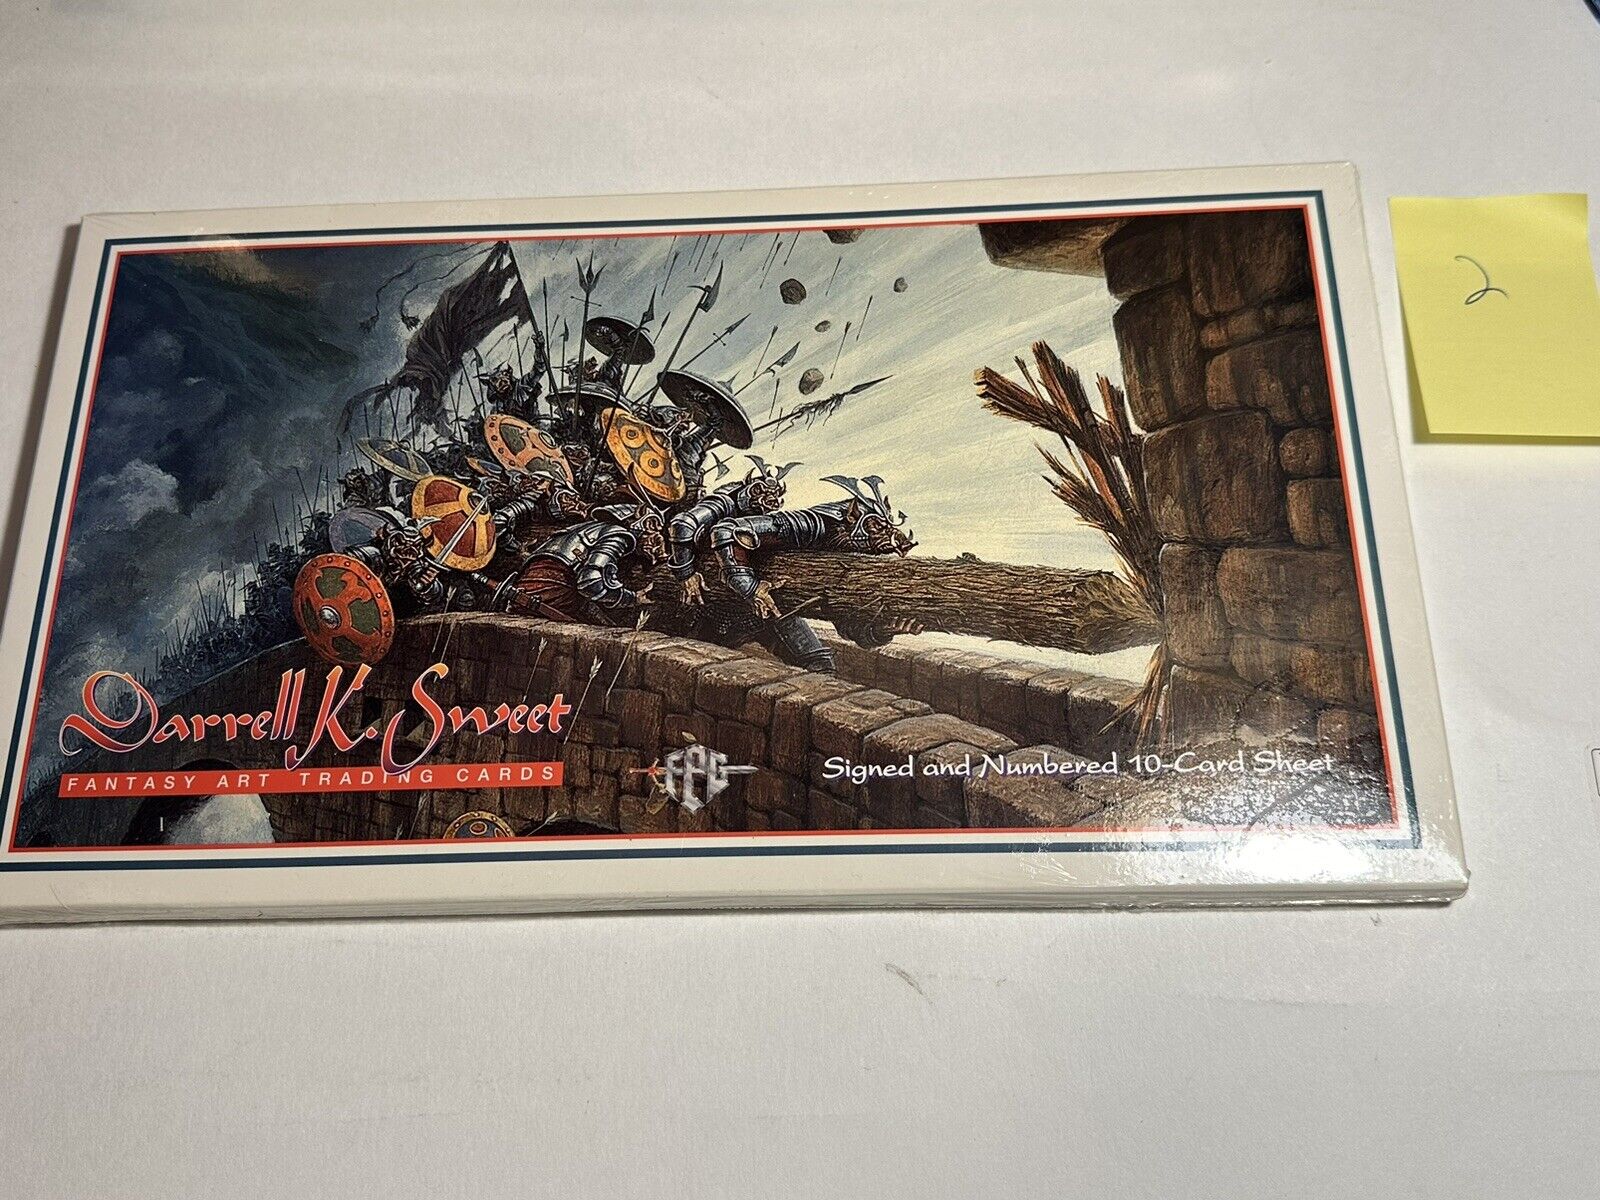 Darrell K Sweet Fantasy Art 10 Card Sheet Signed and Numbered NEW Open Box